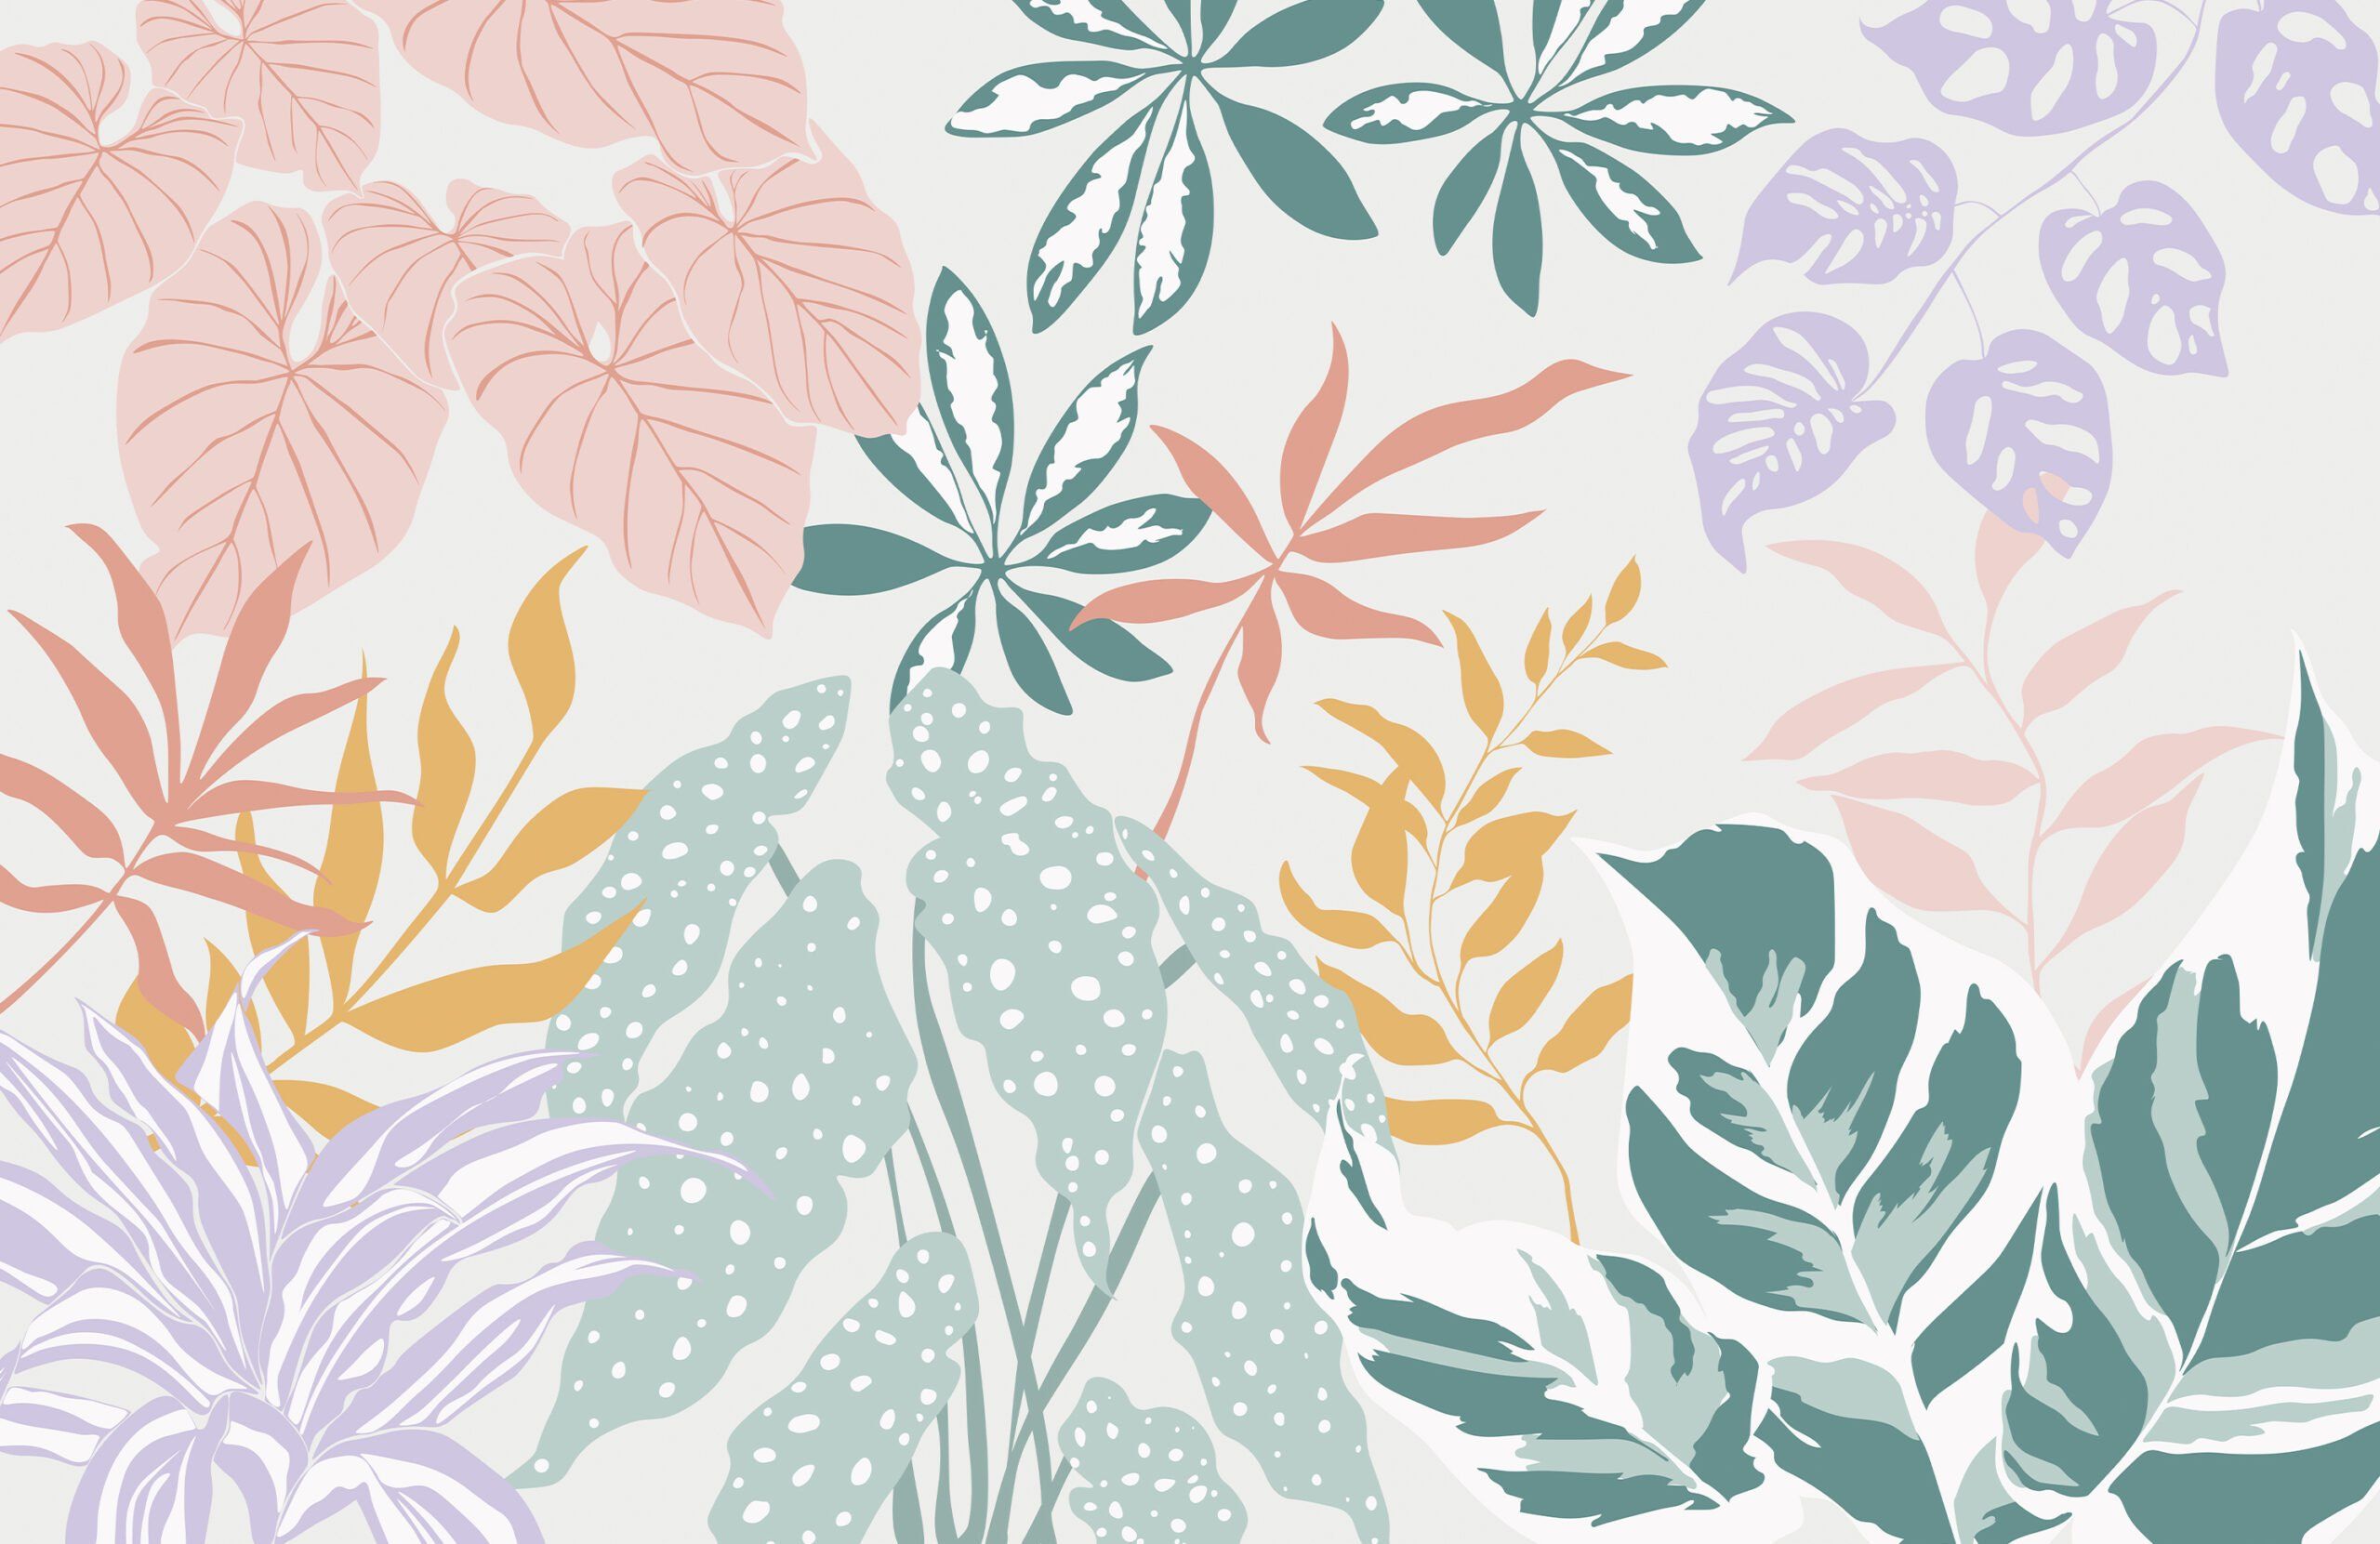 A pattern of colorful leaves on a white background - Botanical